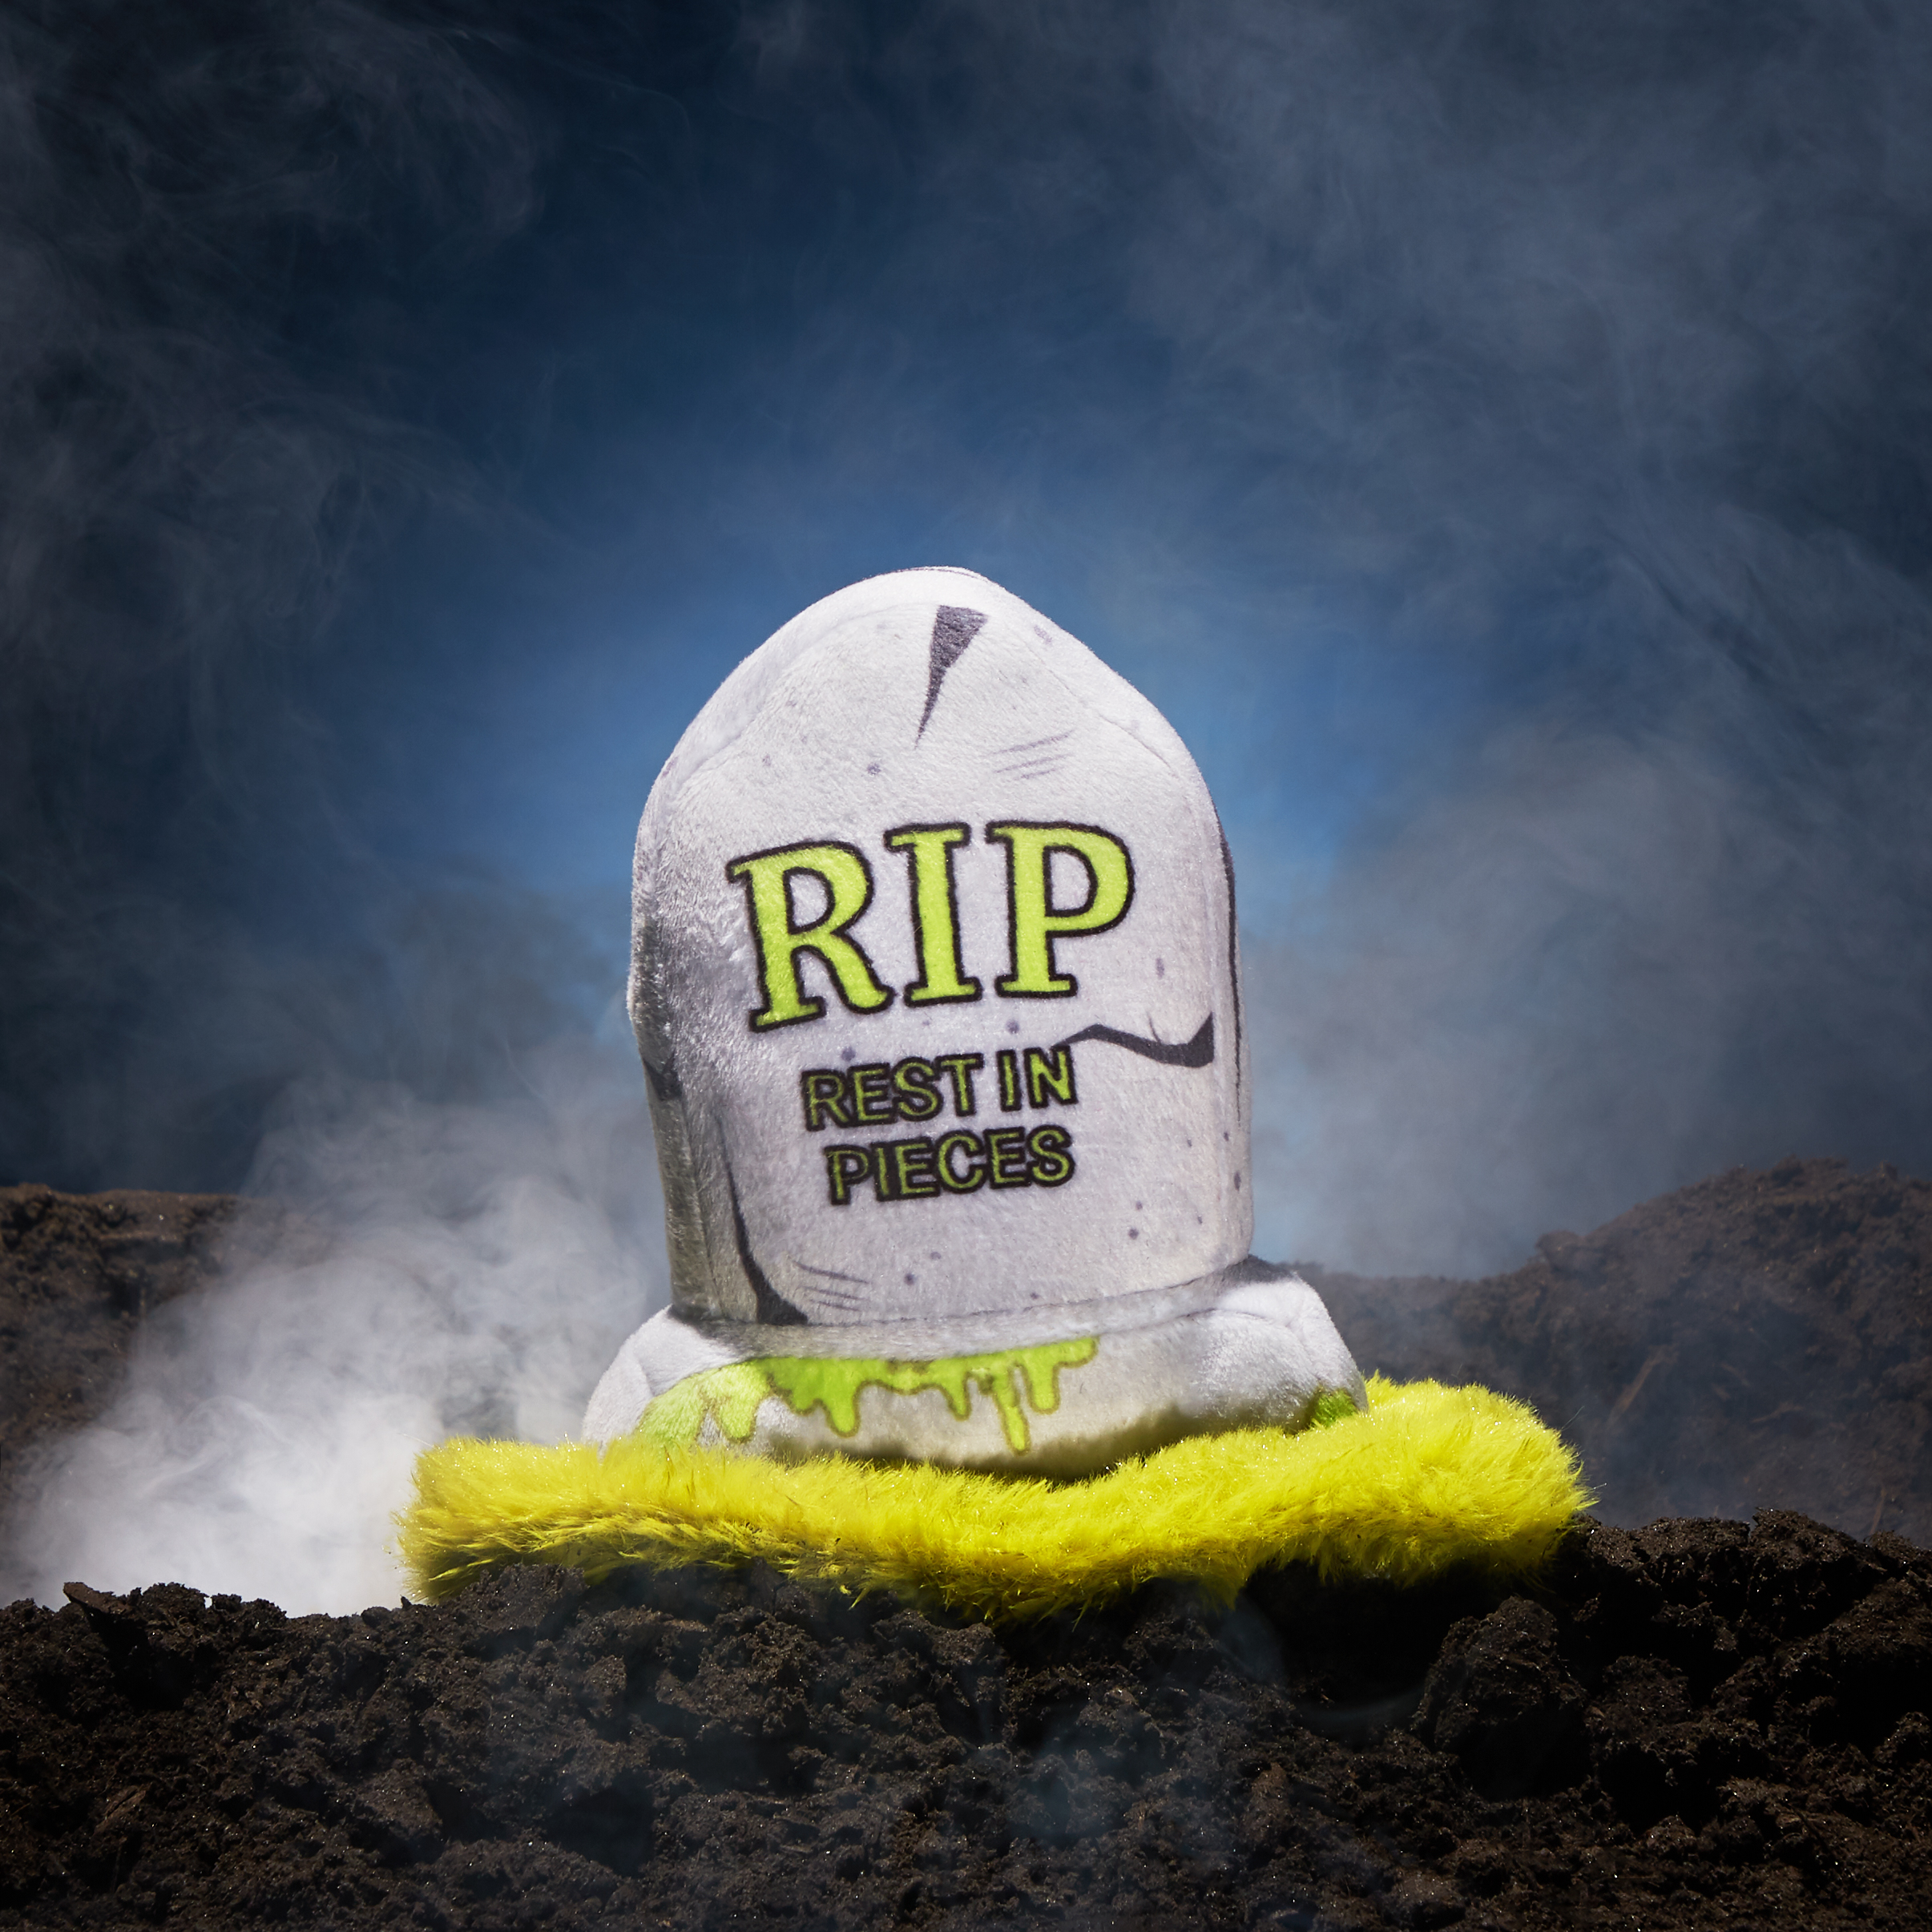 RETAIL_HAUNTEDHOUNDS_PRODUCT-STYLED_0434_TOMBSTONE.jpg